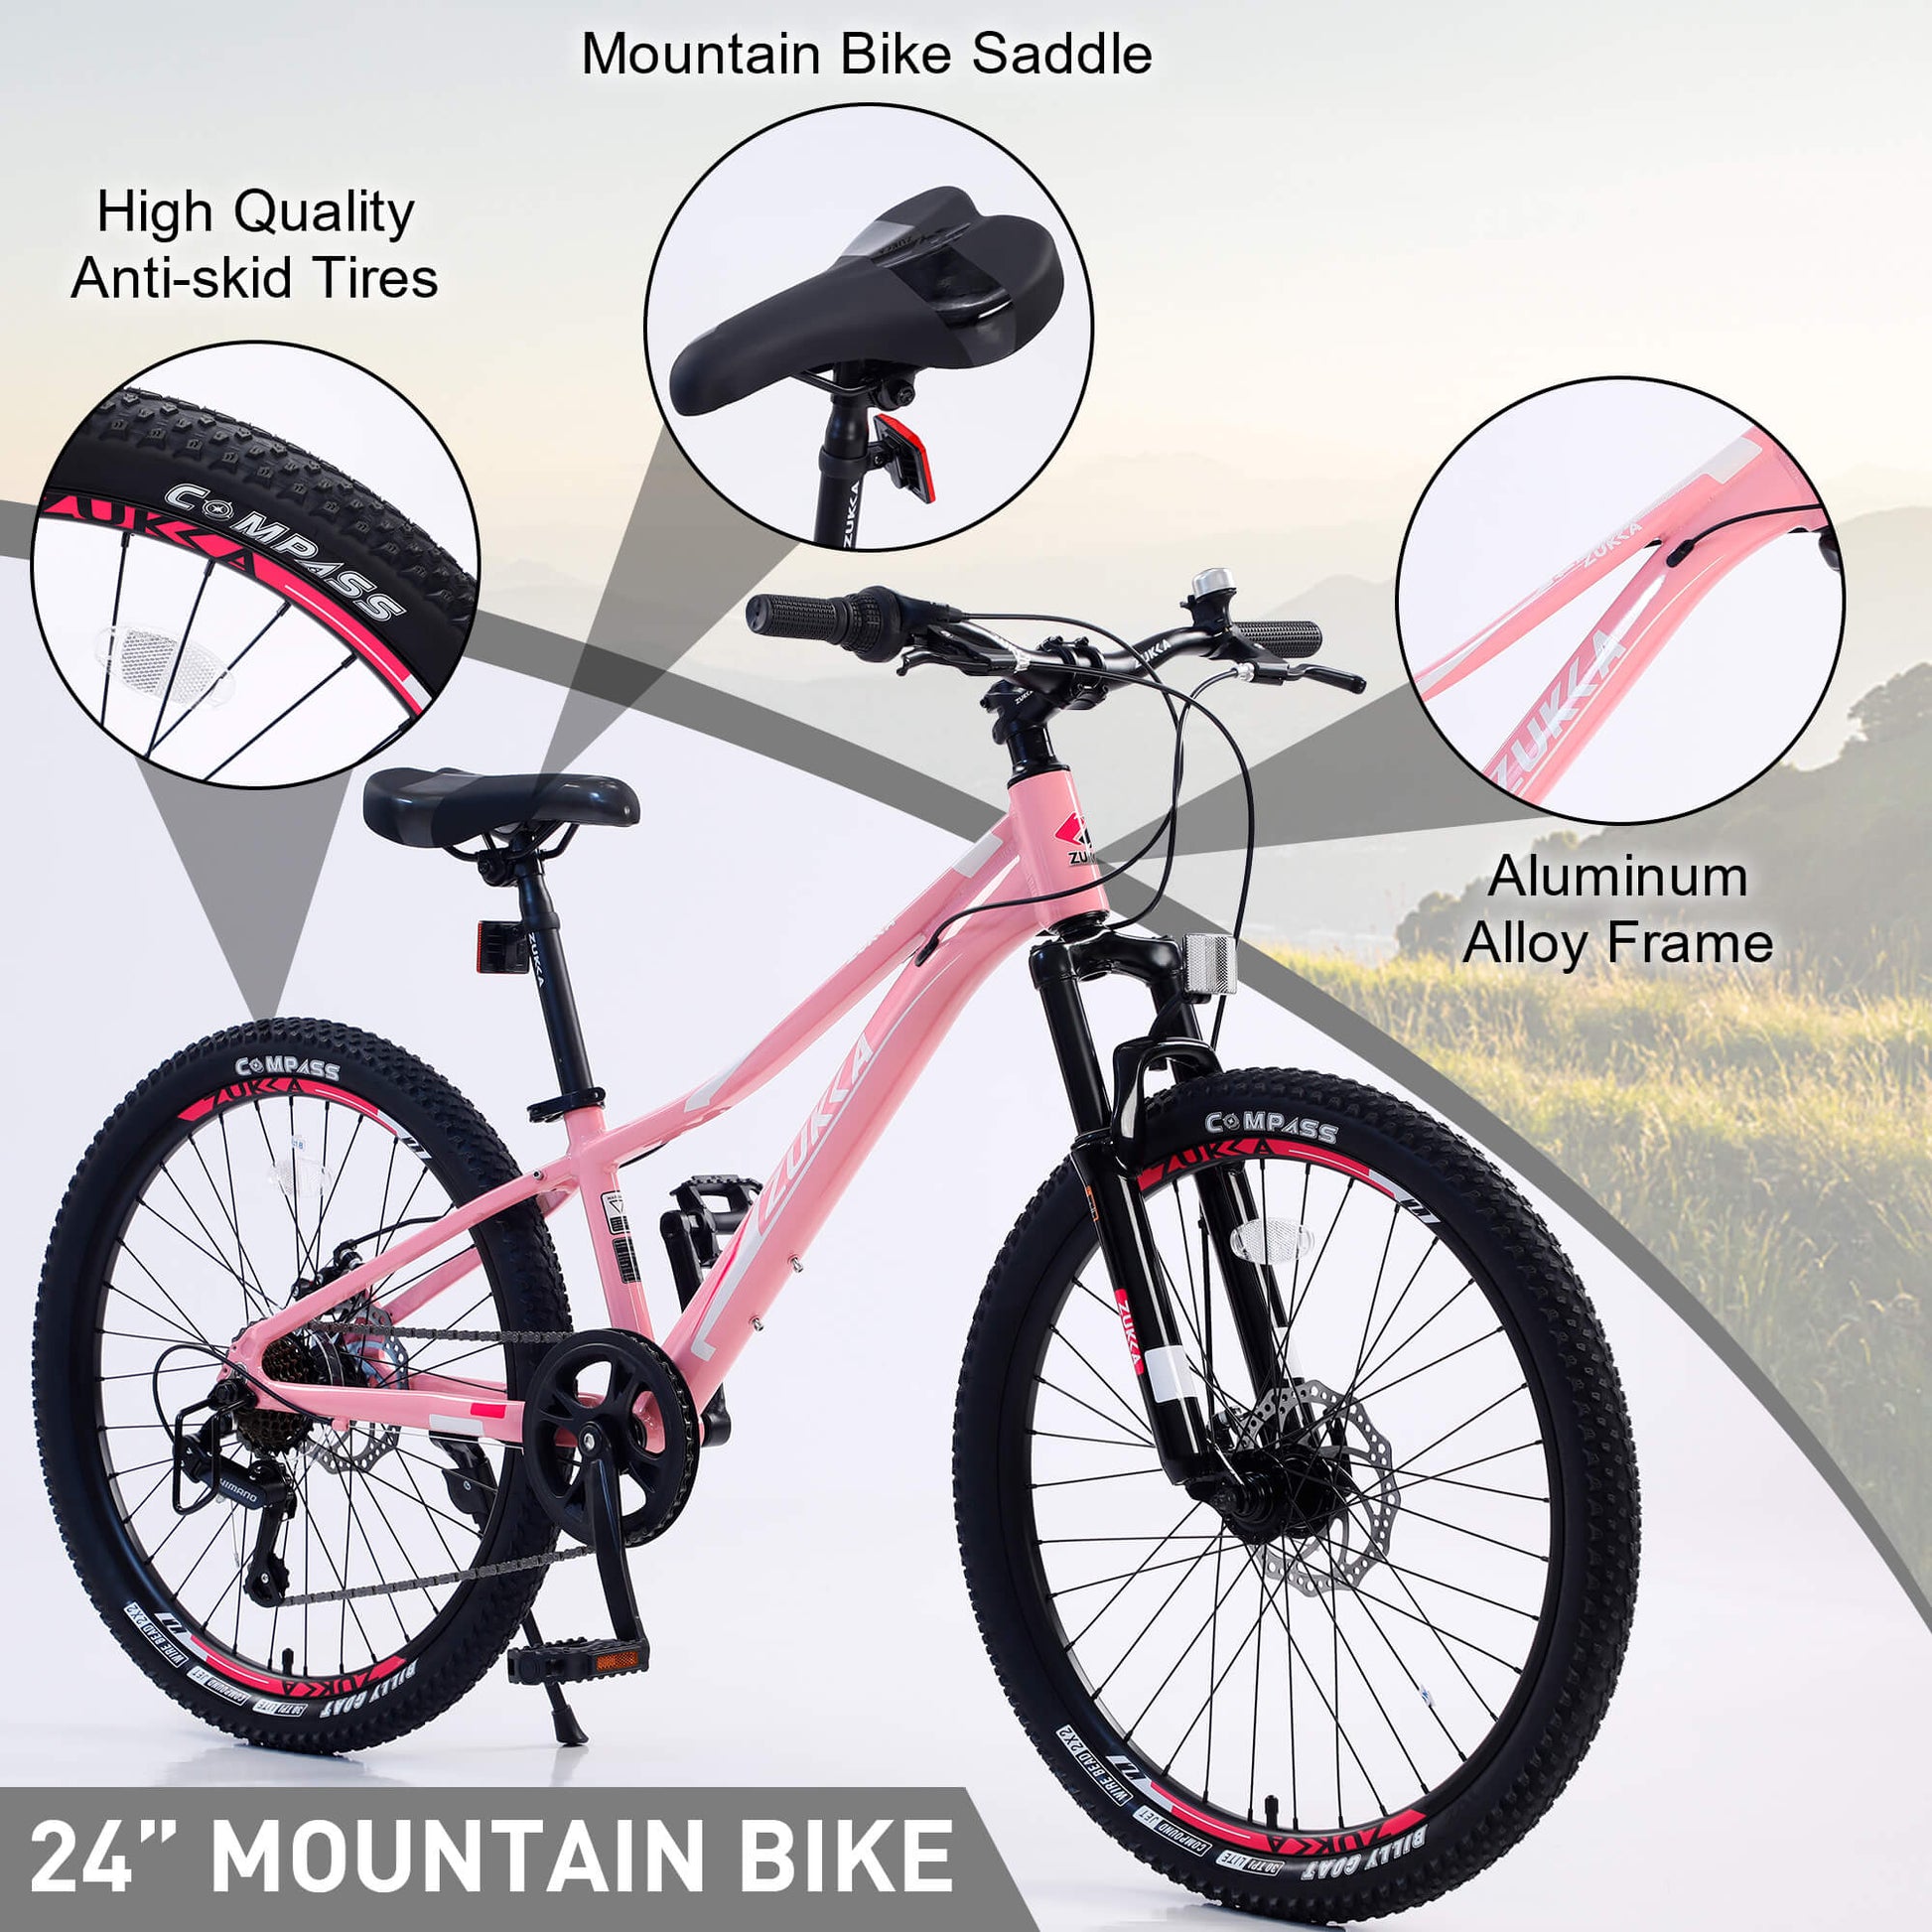 Hycline 24”×2.1" Dynamic Mountain Bike For Youth And Adults - Color Pink For Girls